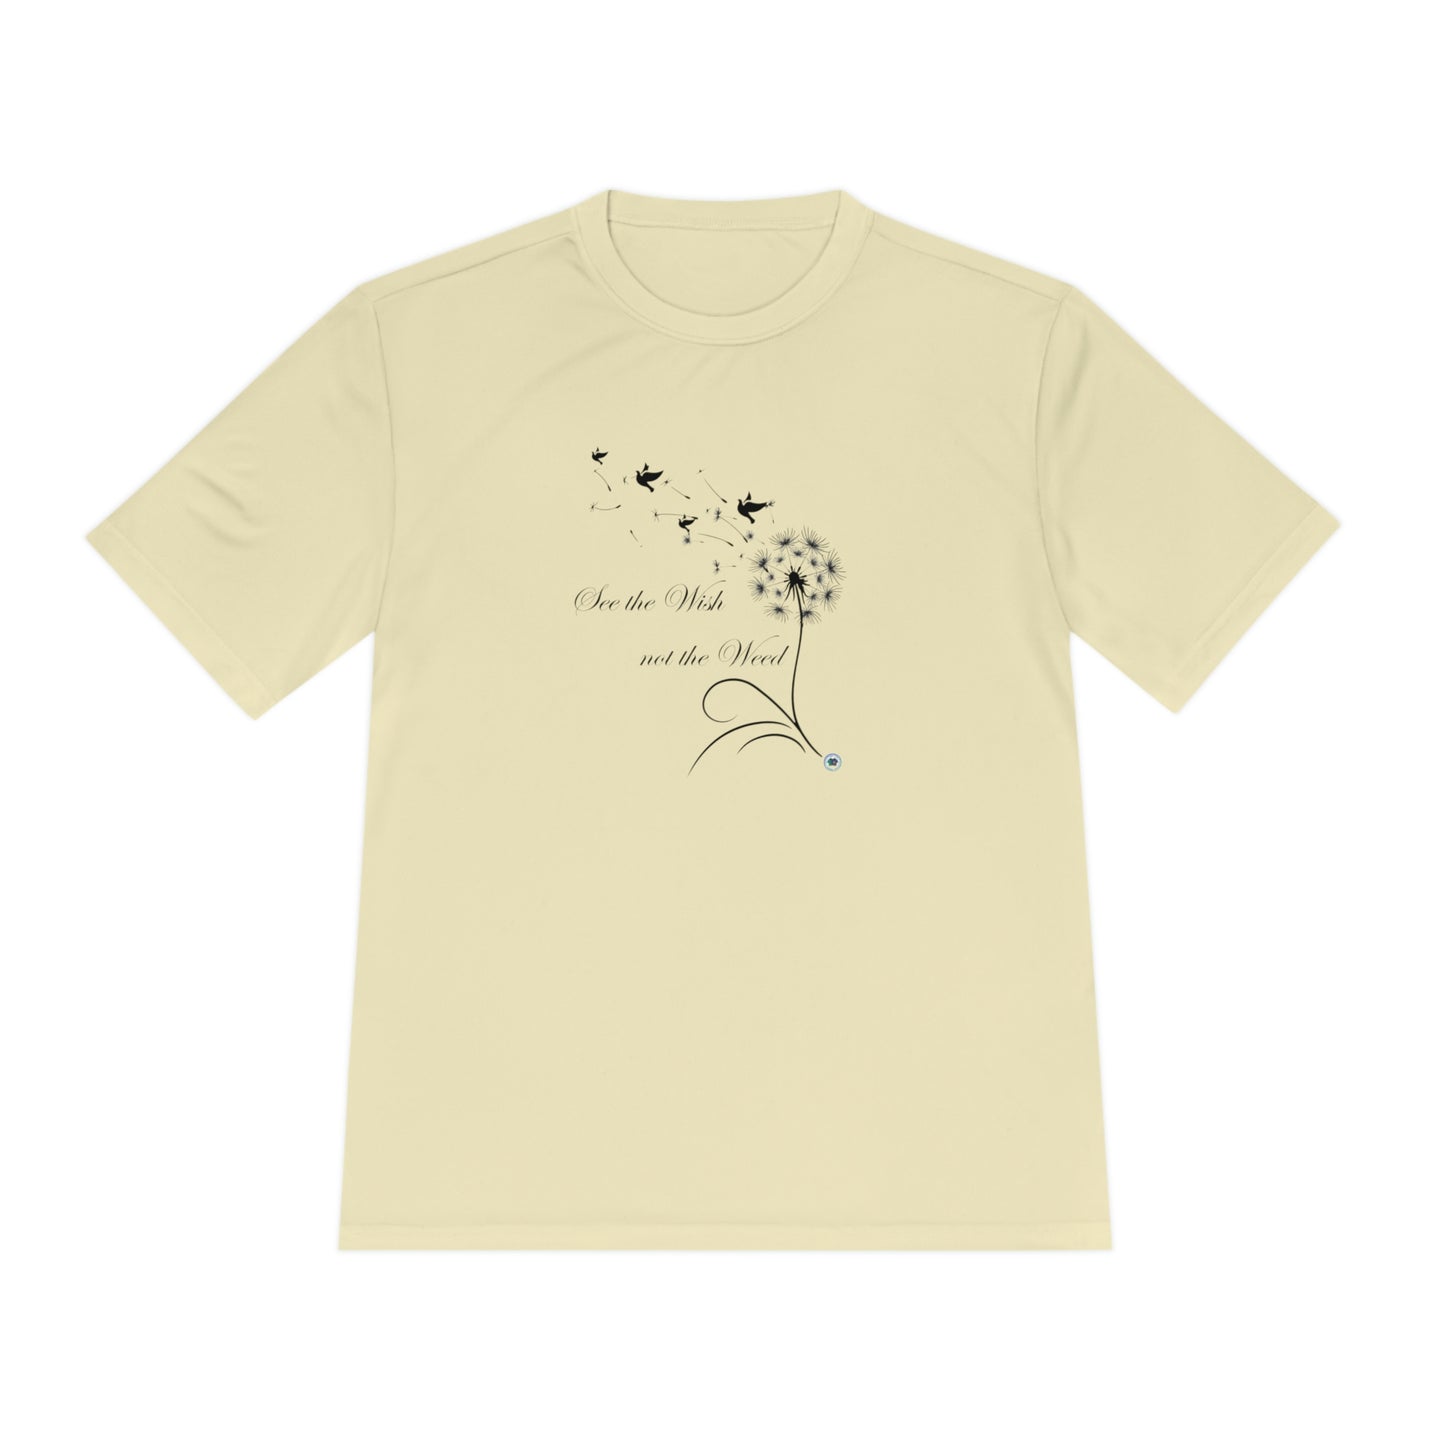 ‘See the wish, Not the weed’ Unisex Moisture Wicking Tee